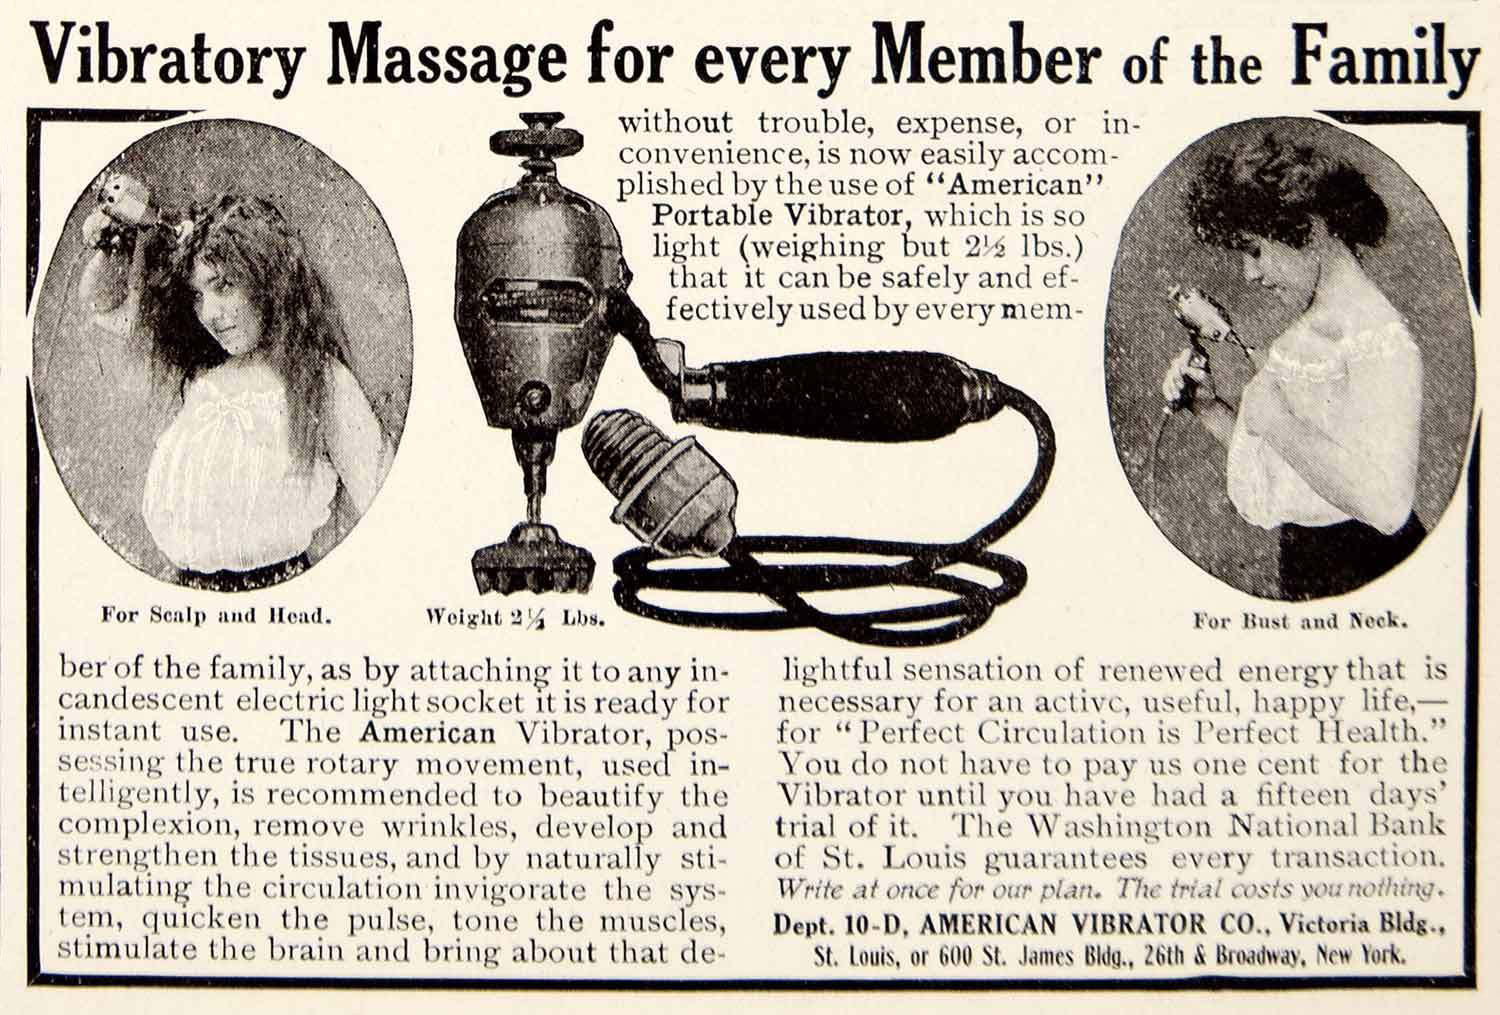 Vintage vibrator ad from 1906 proclaiming "vibratory massage for every member of the family."